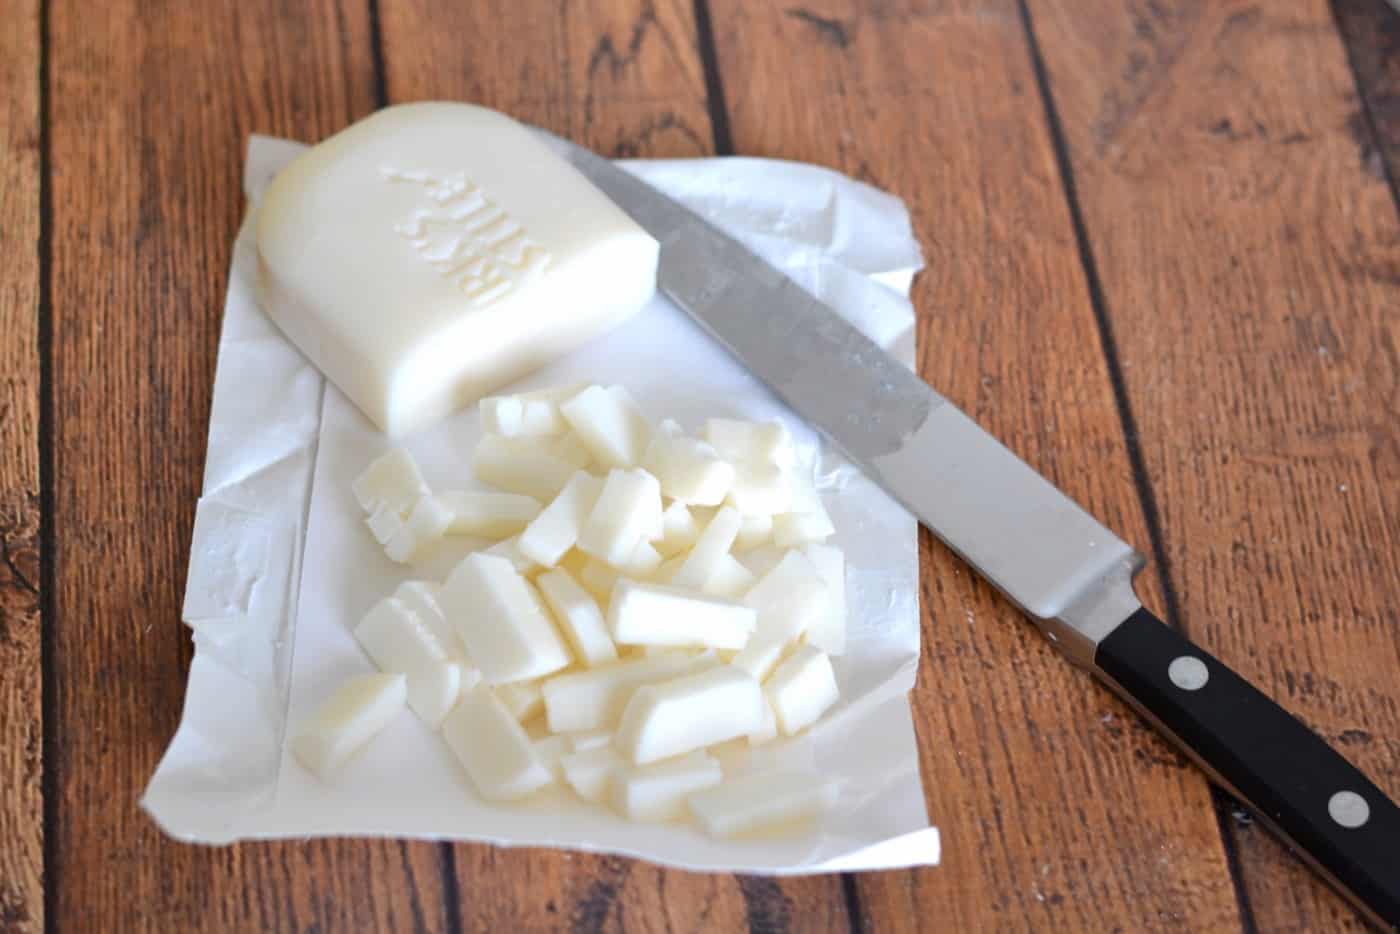 Bar of castile soap cut into pieces with a knife